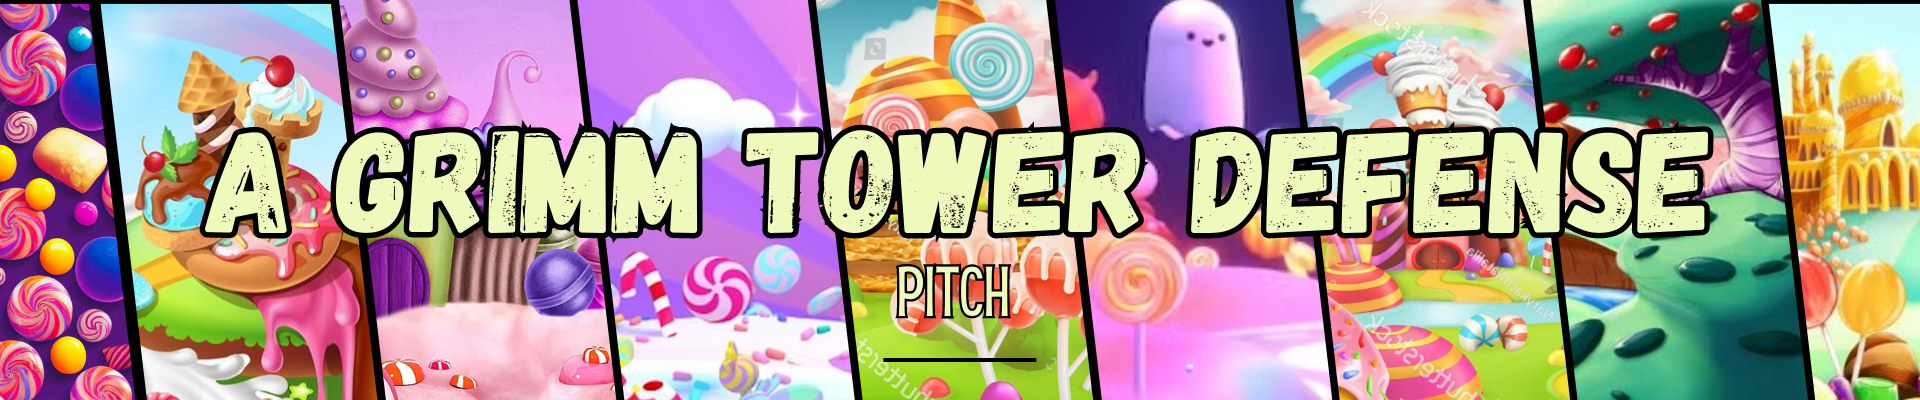 Pitch - A Grimm Tower Defense